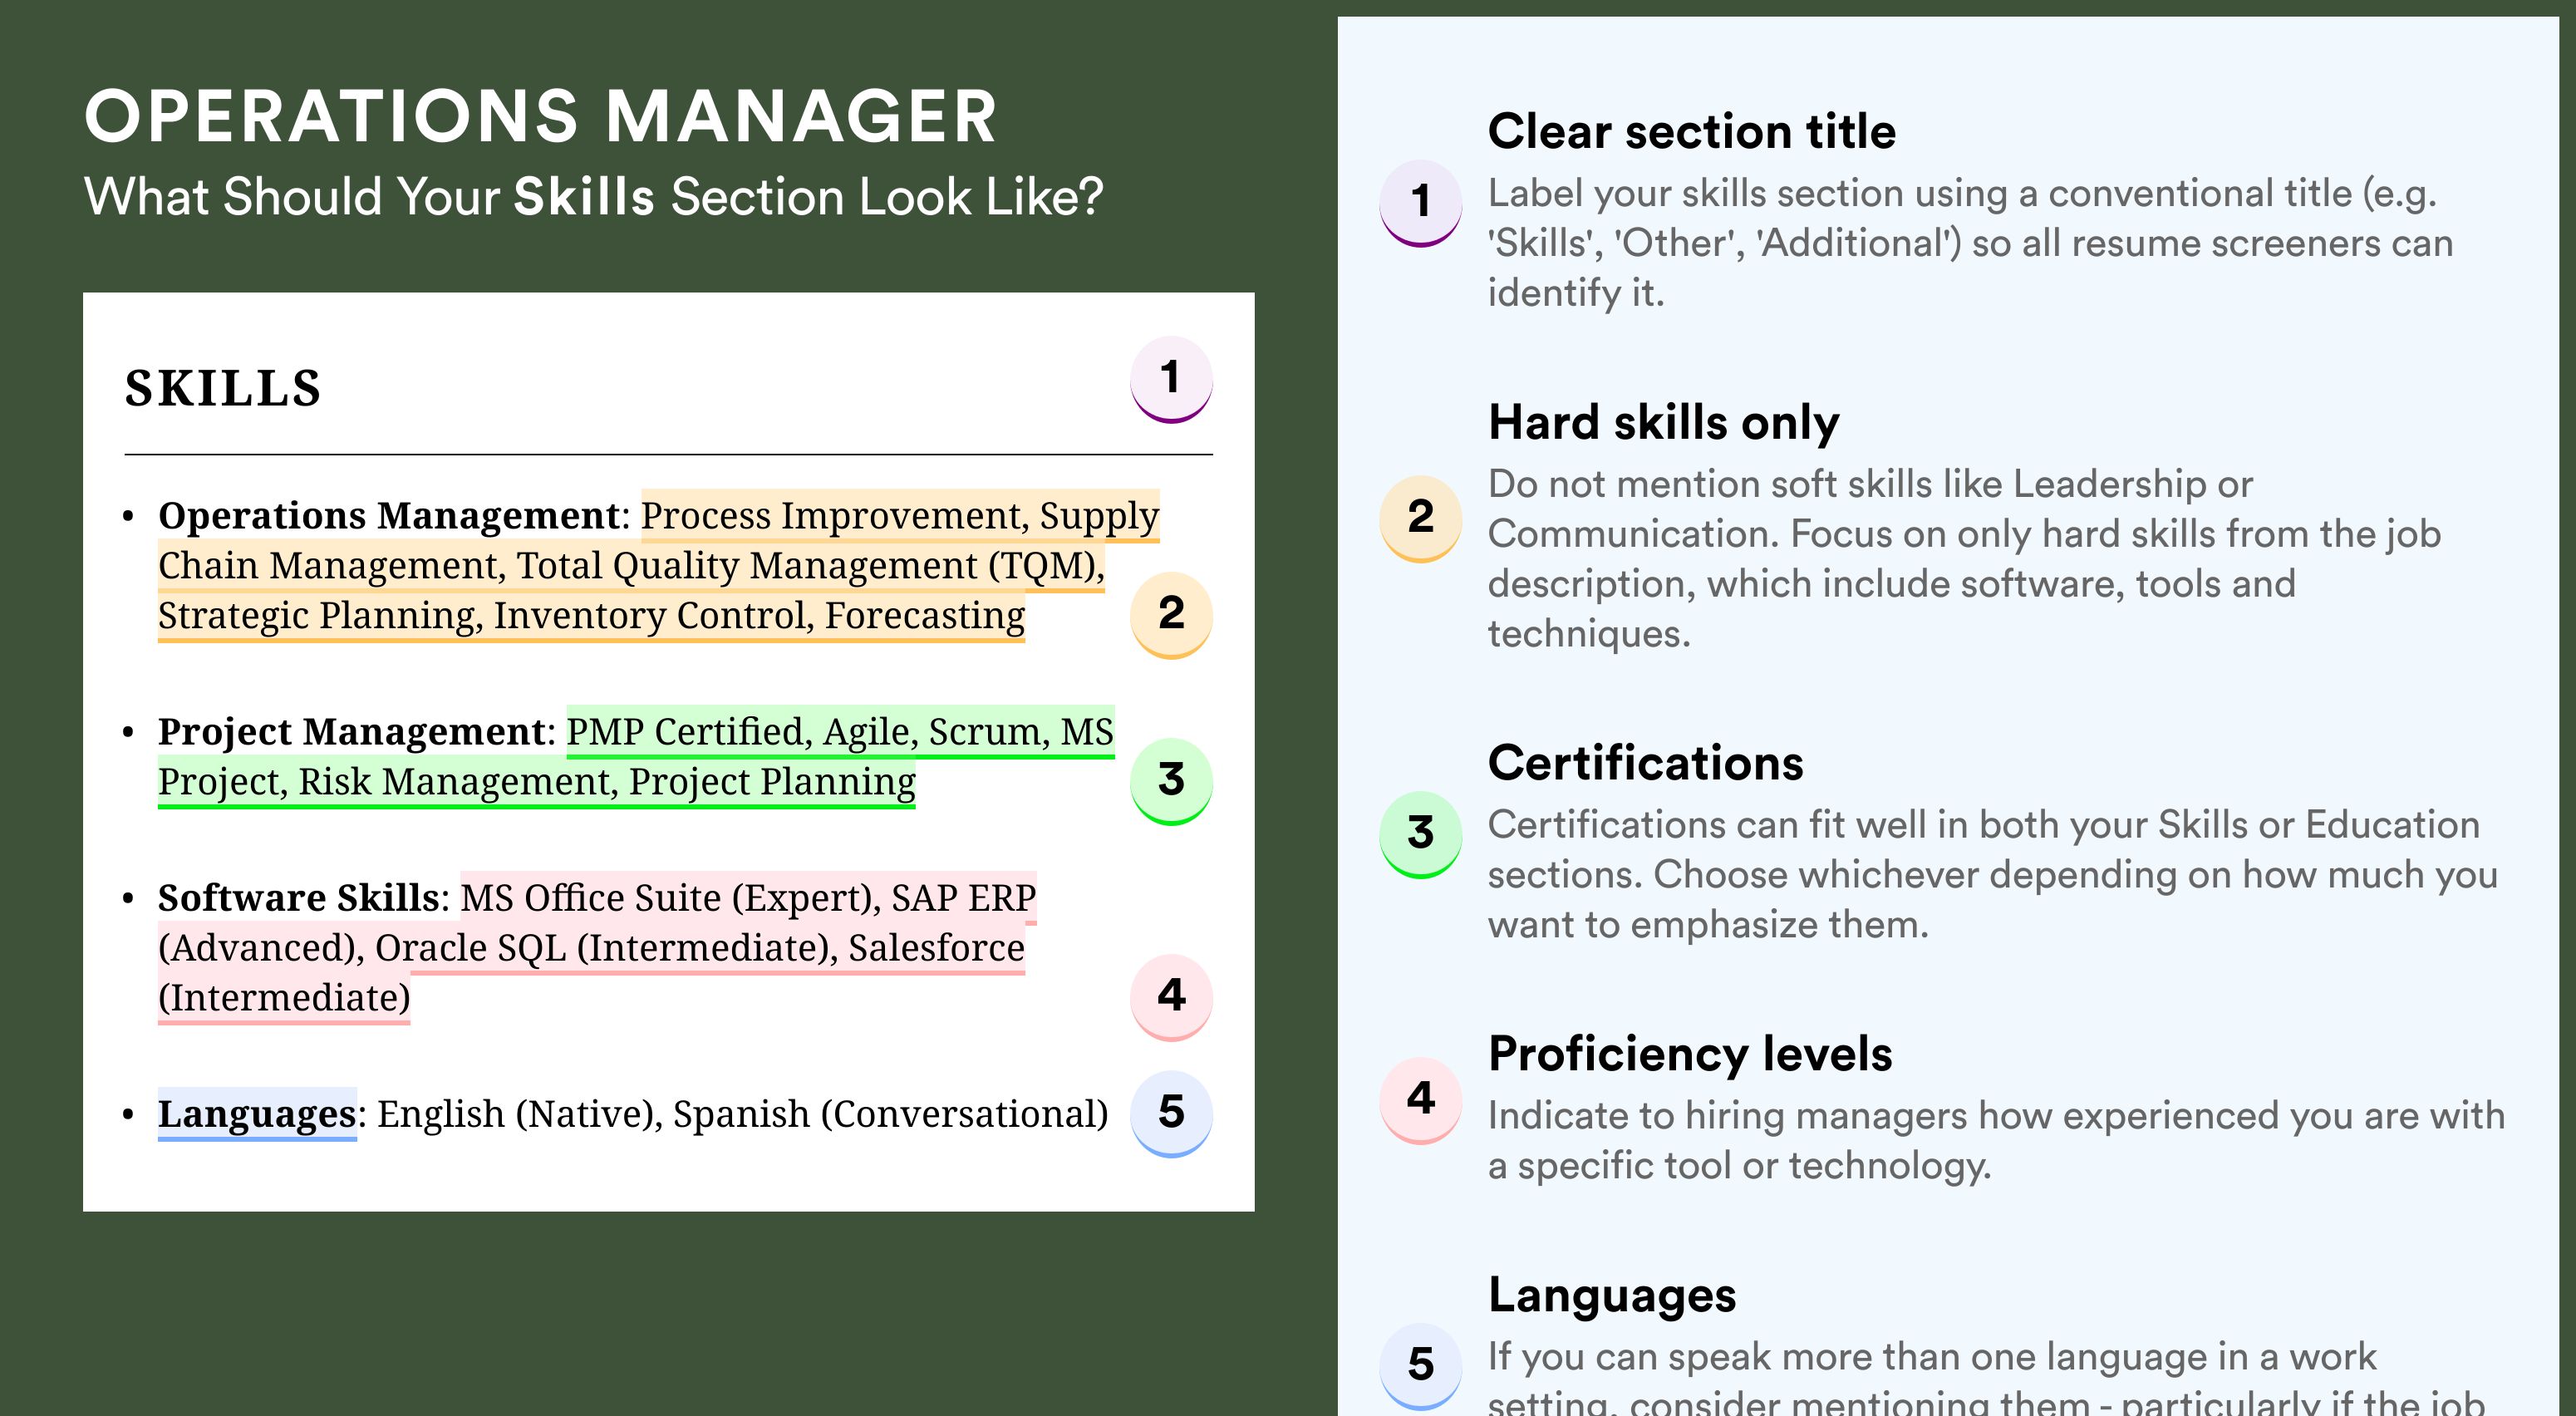 How To Write Your Skills Section - Operations Manager Roles